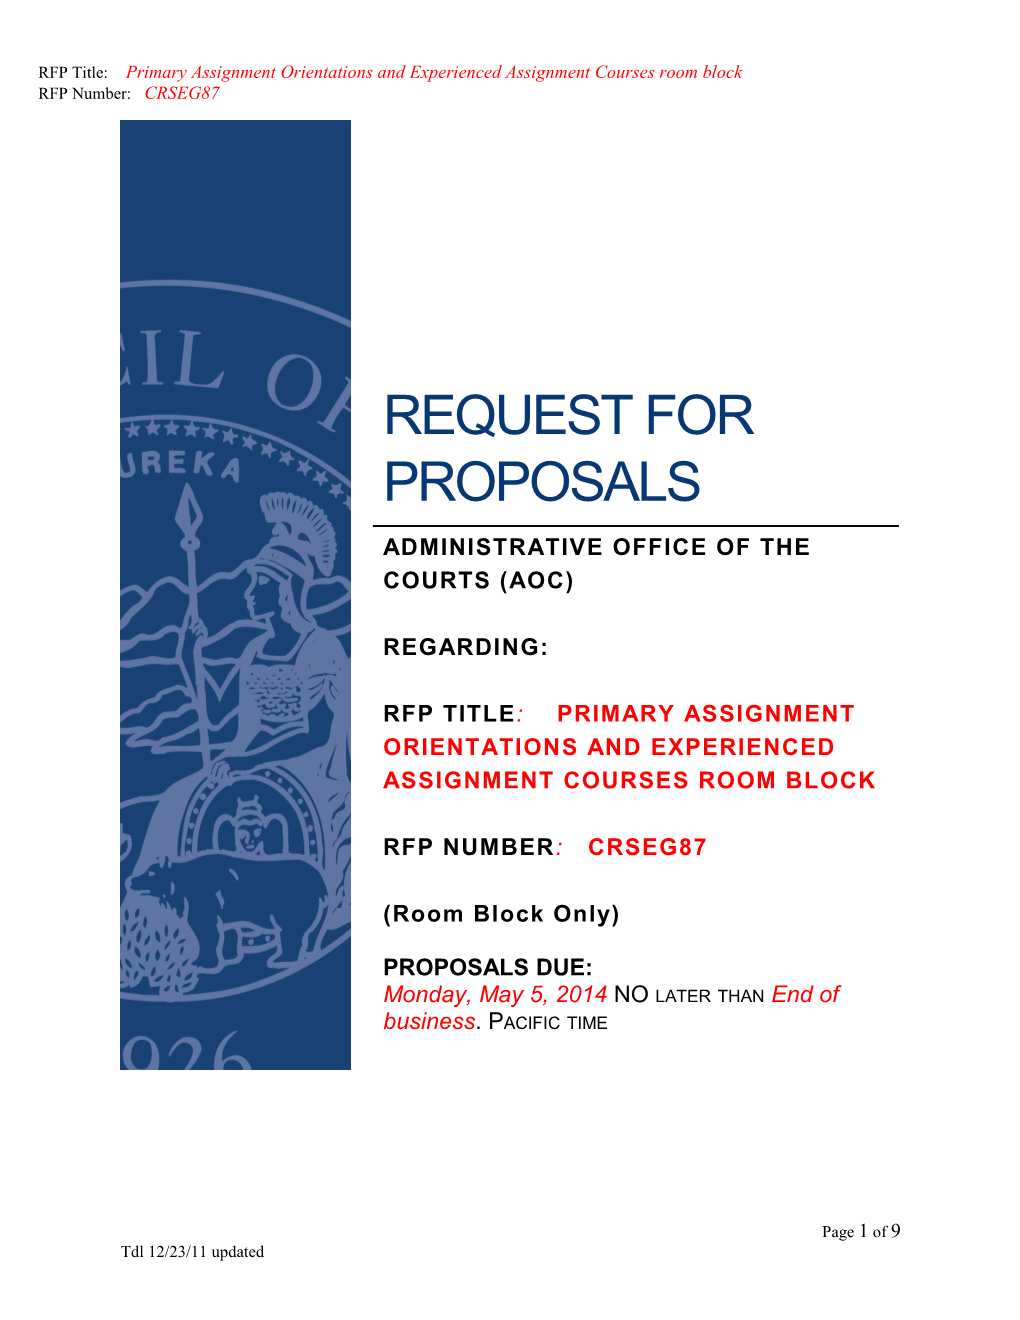 RFP Title: Primary Assignment Orientations and Experienced Assignment Courses Room Block